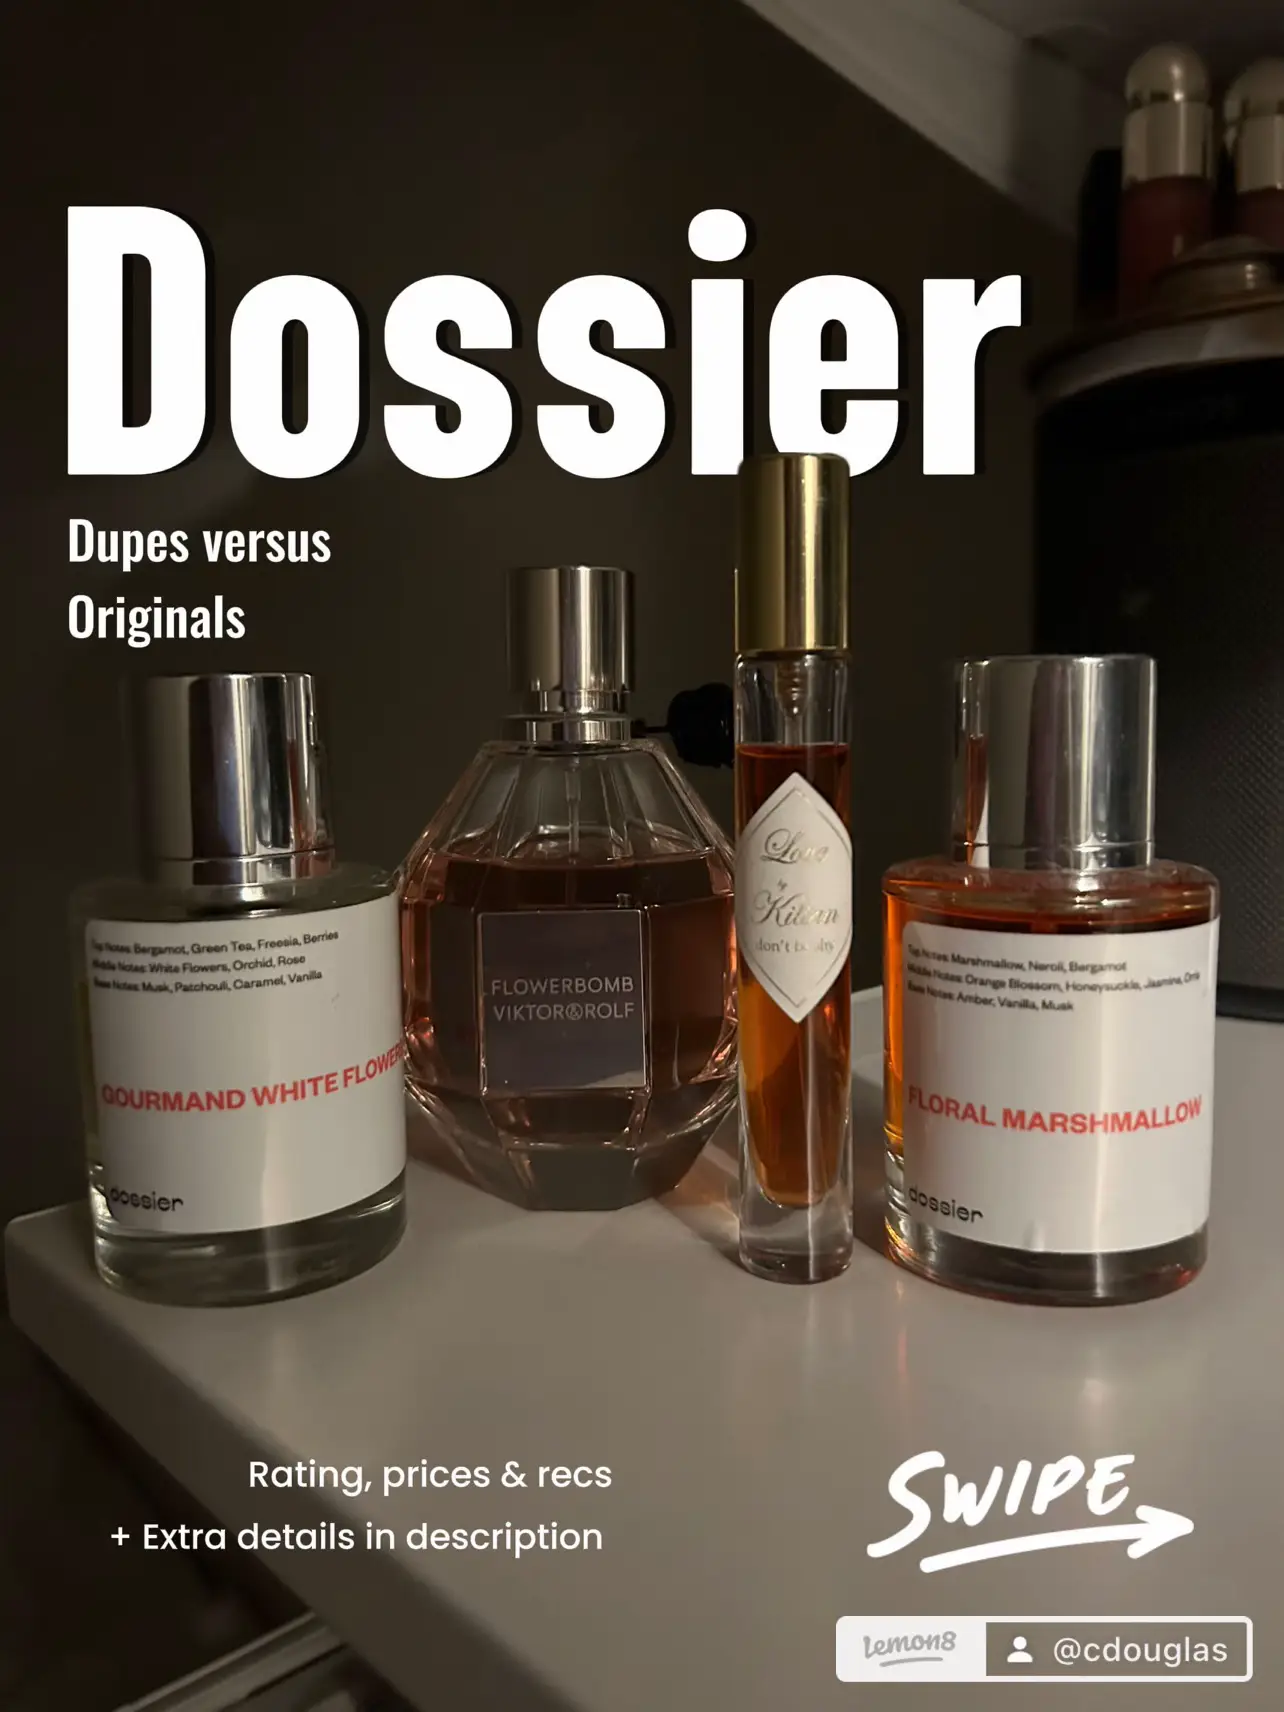 DOSSIER PERFUME DOOPS⚡️🎉, Gallery posted by c.doug ♡